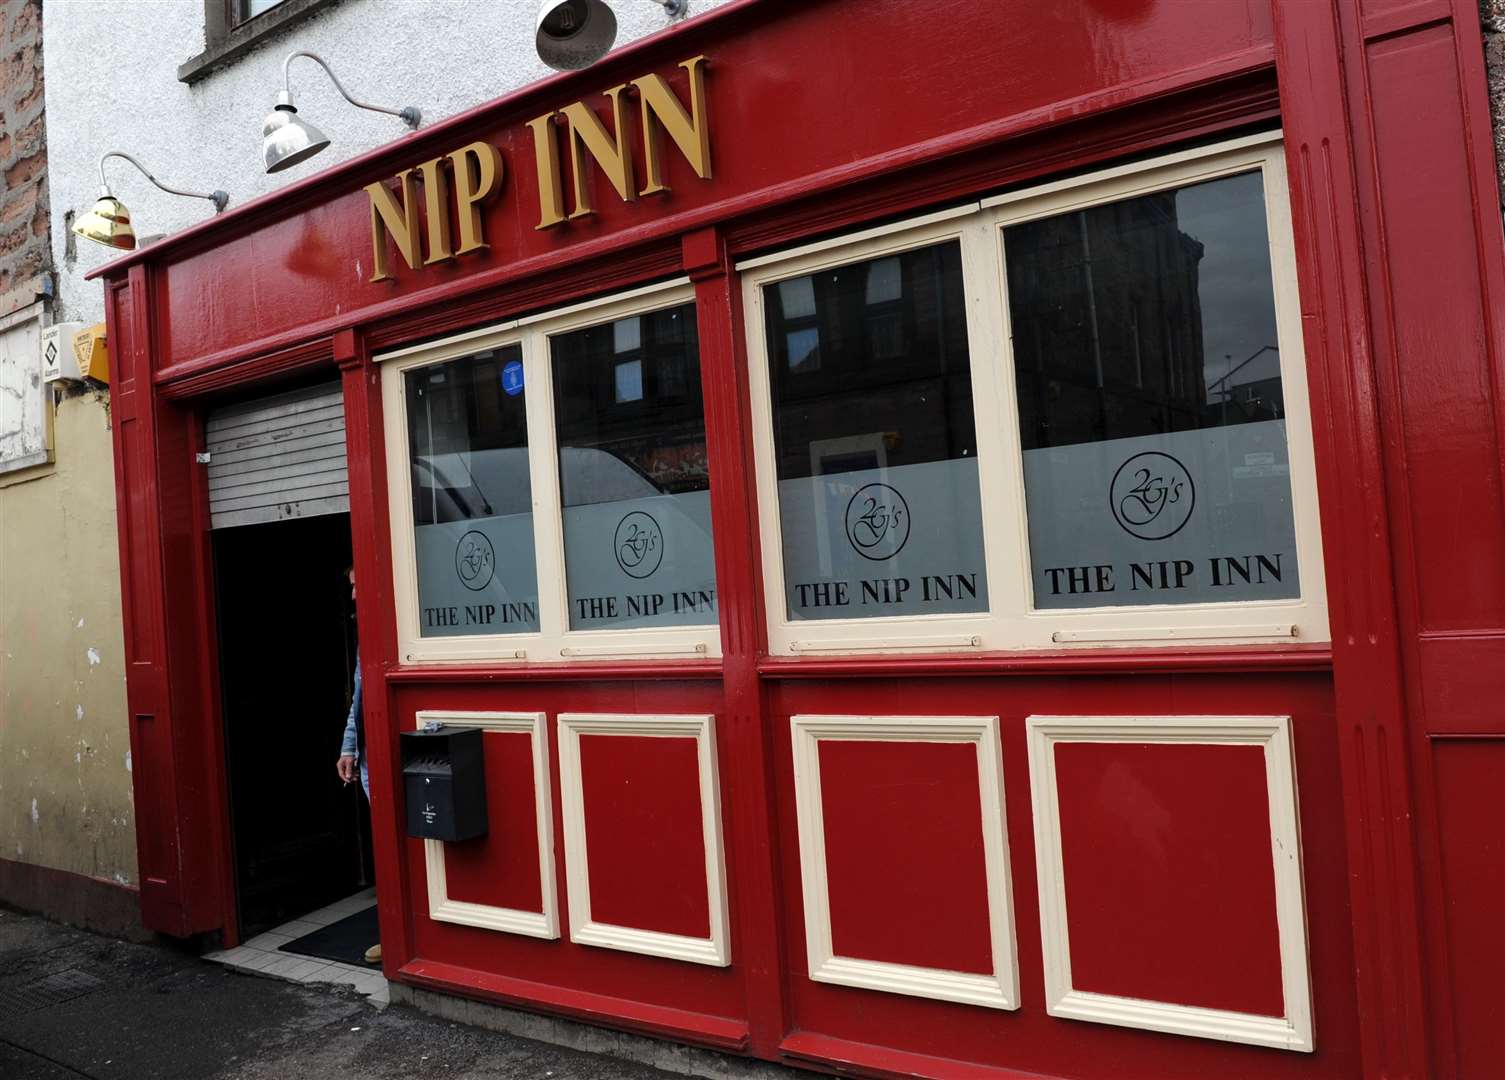 The incident occurred at the Nip Inn.